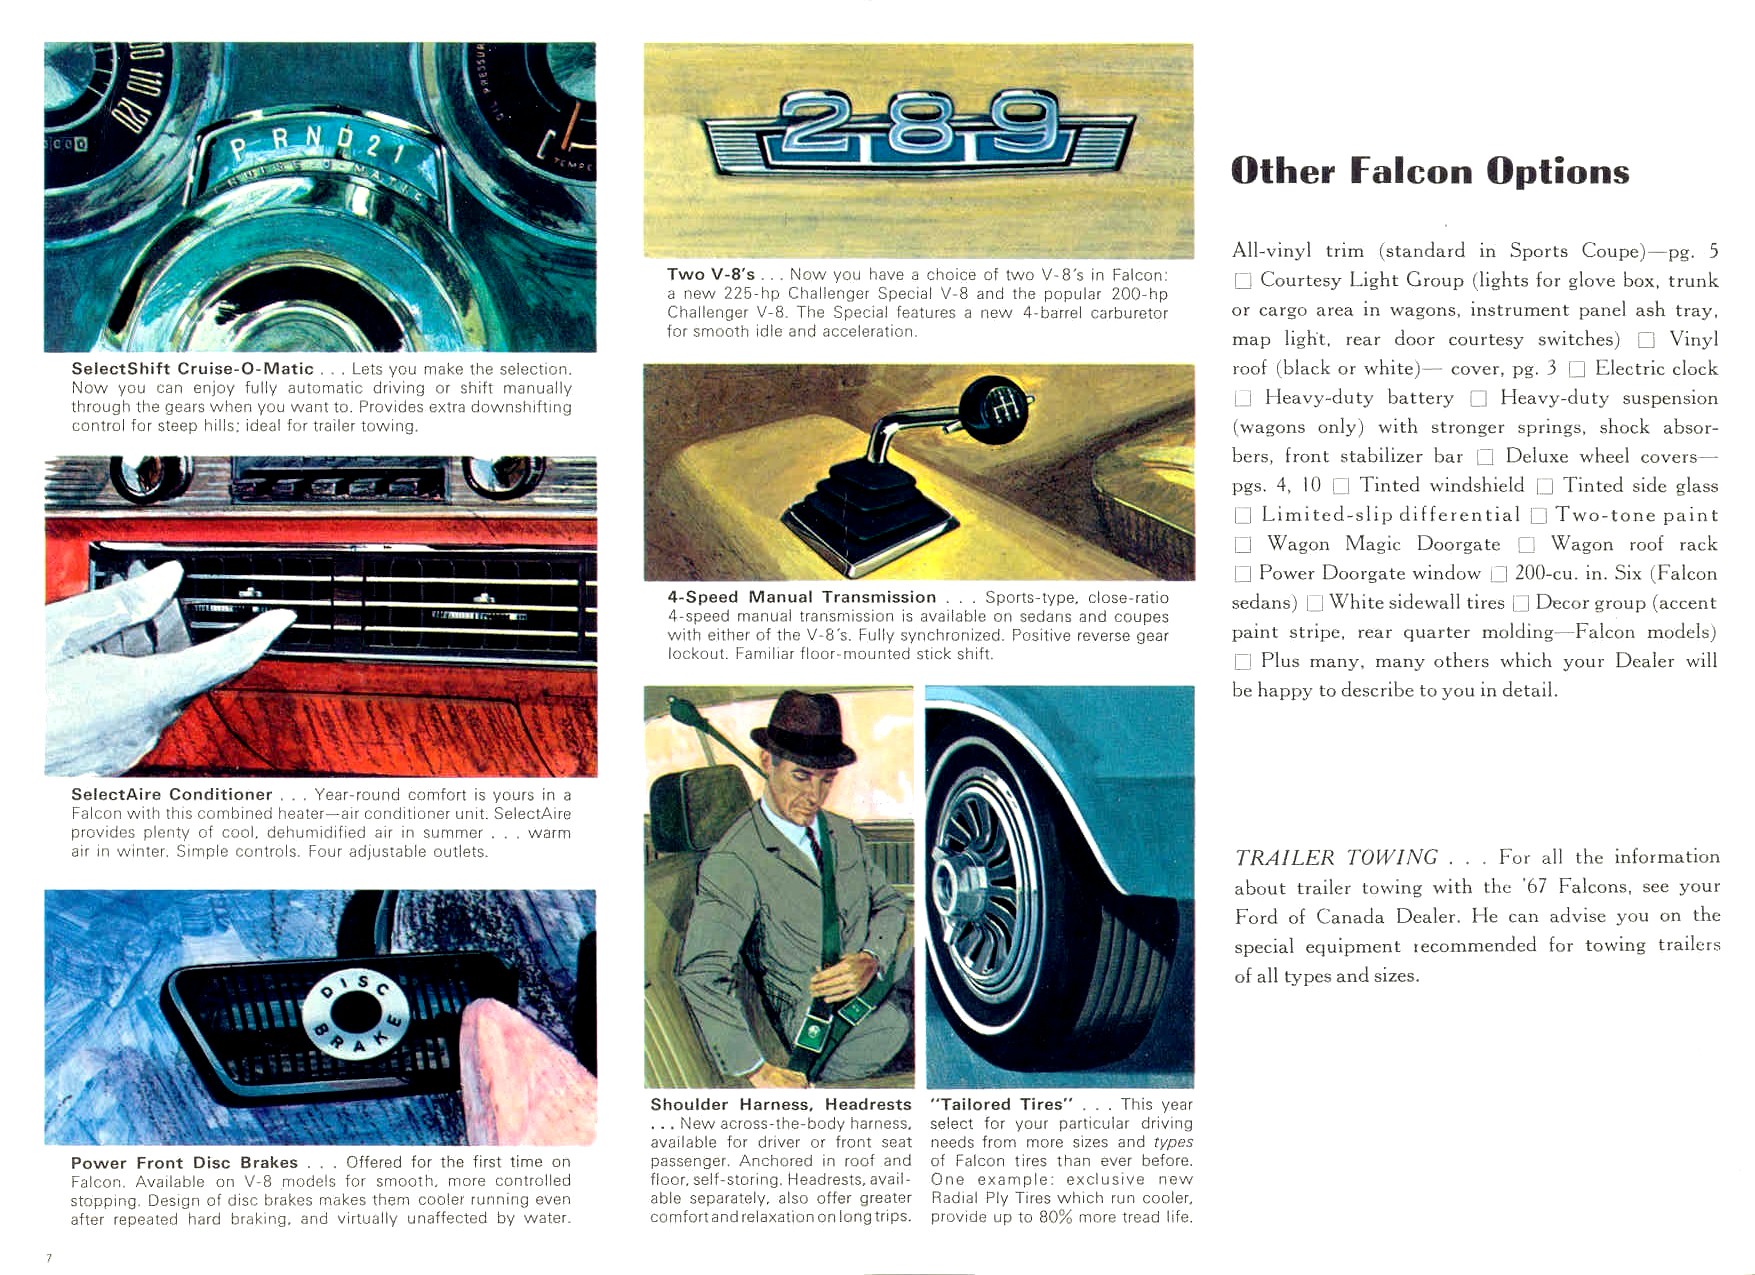 1967 Ford Falcon Canadian Brochure Page 3